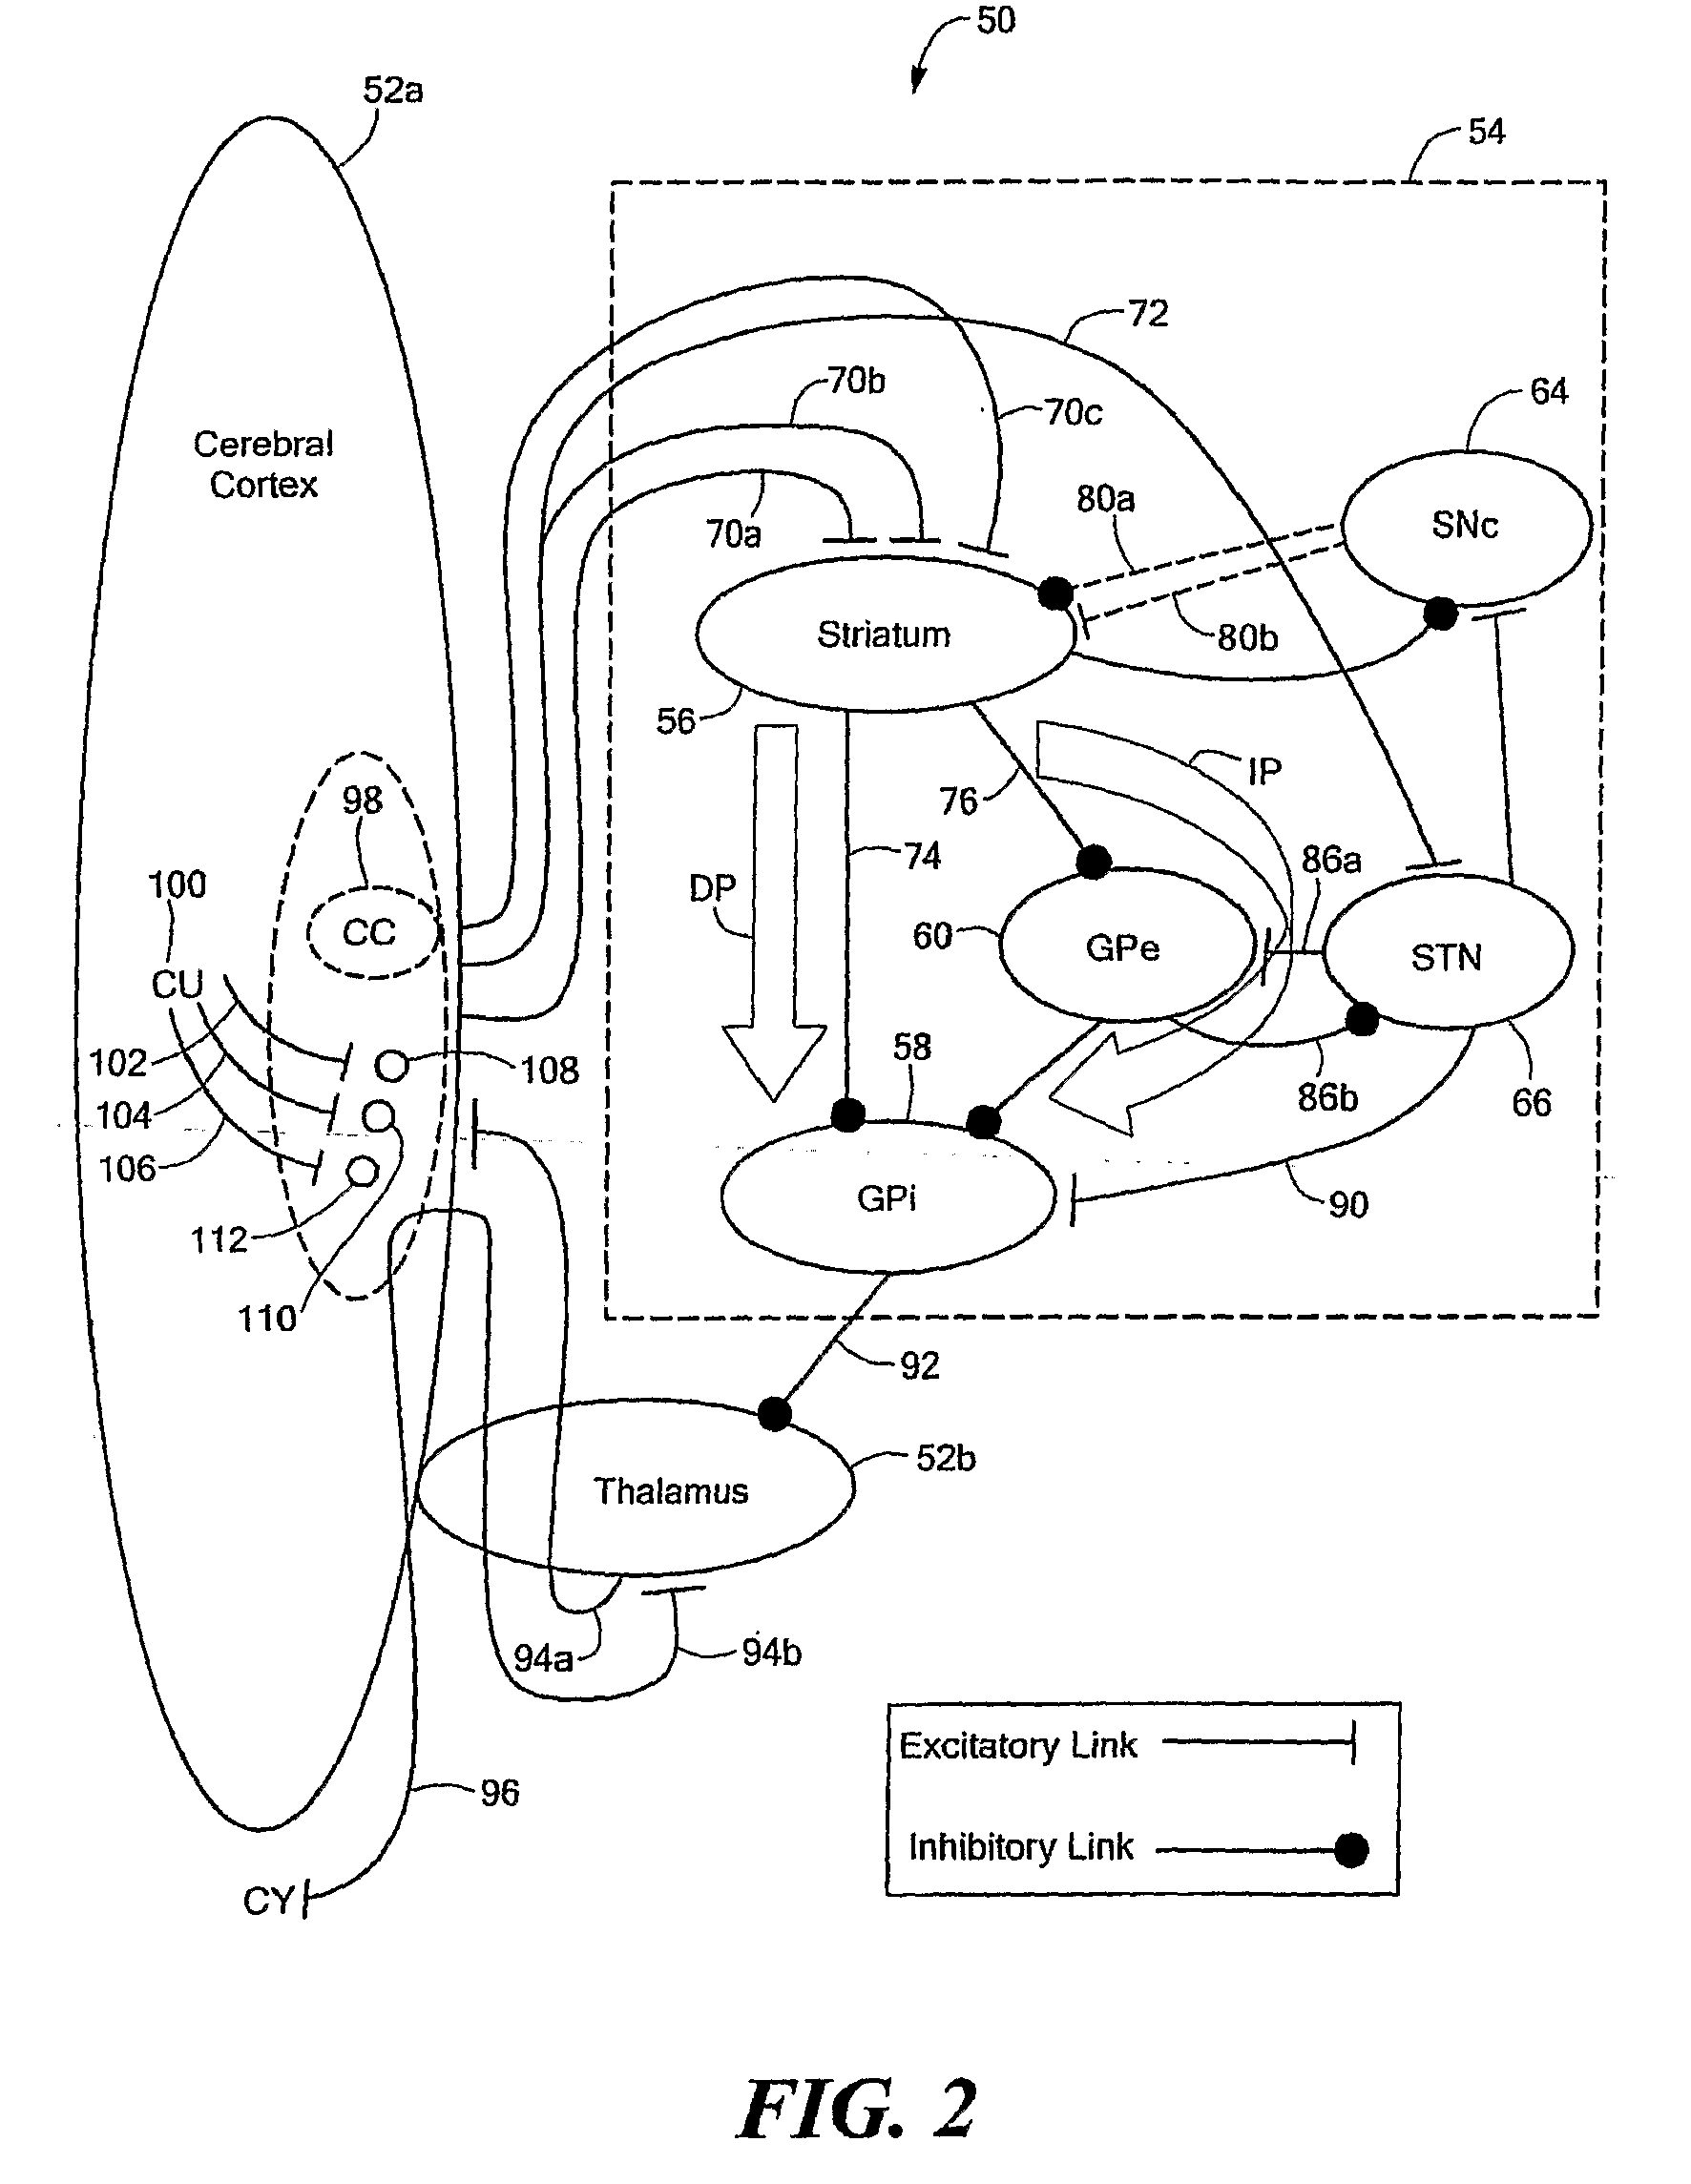 Computer-Implemented Model of the Central Nervous System